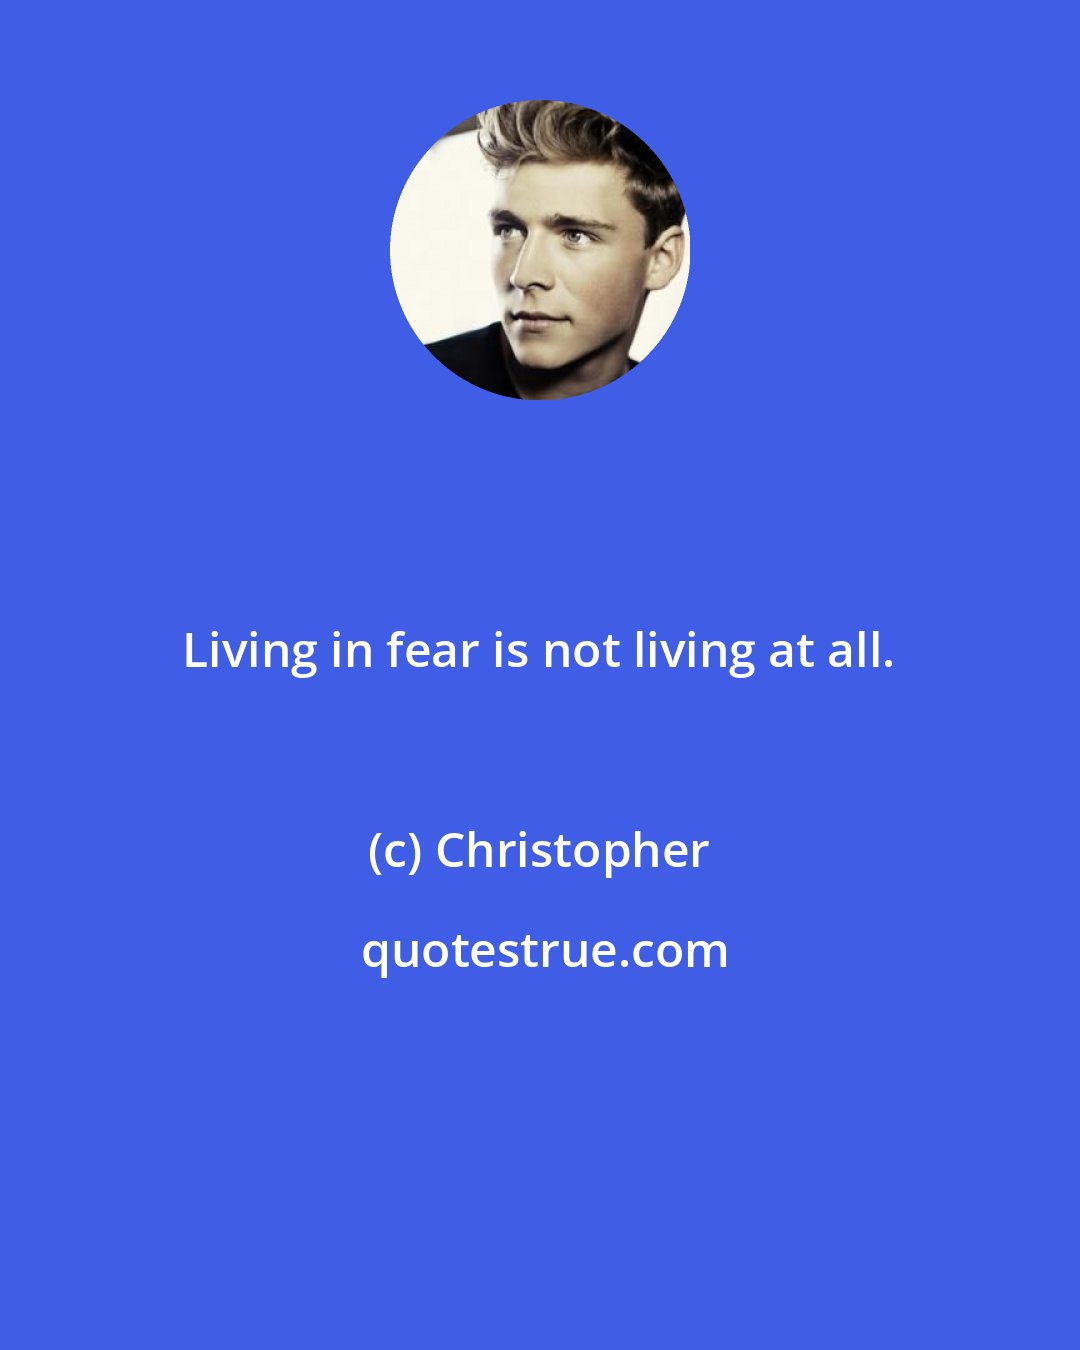 Christopher: Living in fear is not living at all.